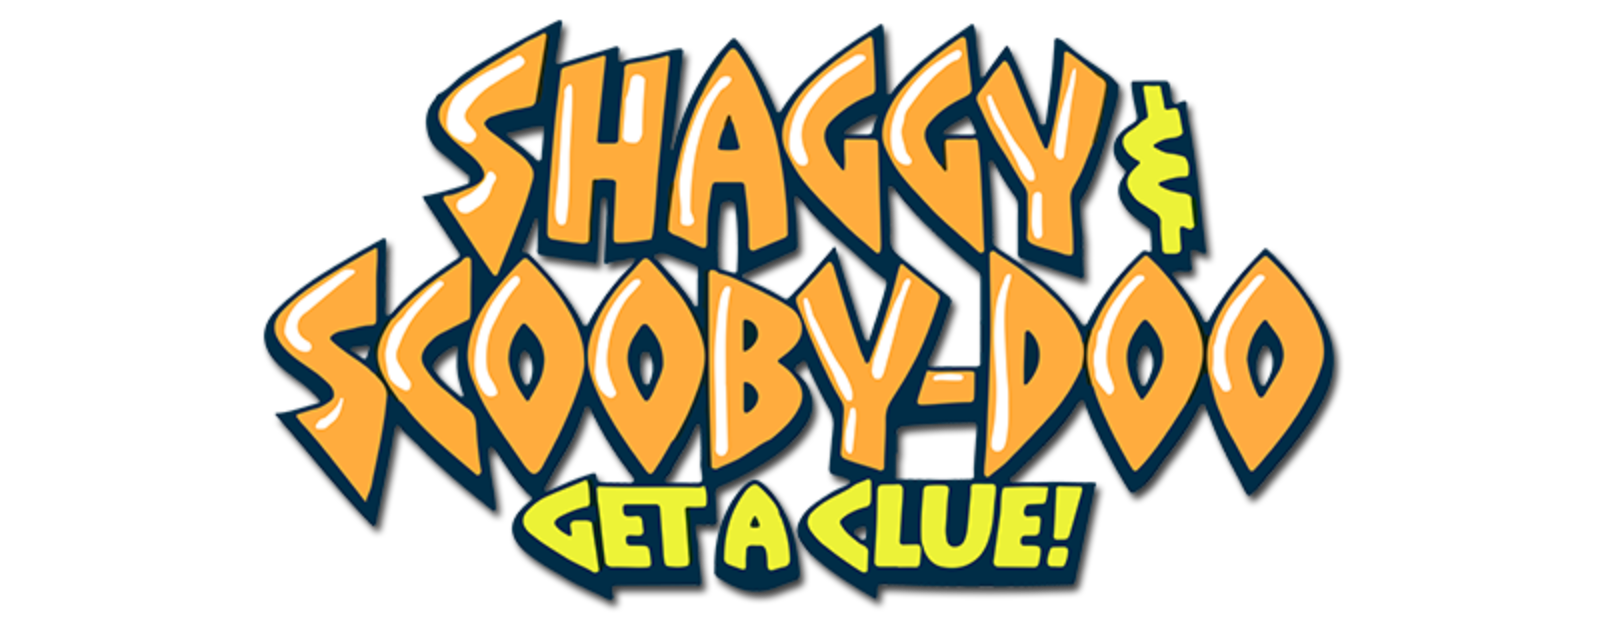 Shaggy Scooby Doo Get a Clue Complete (2 DVDs Box Set)